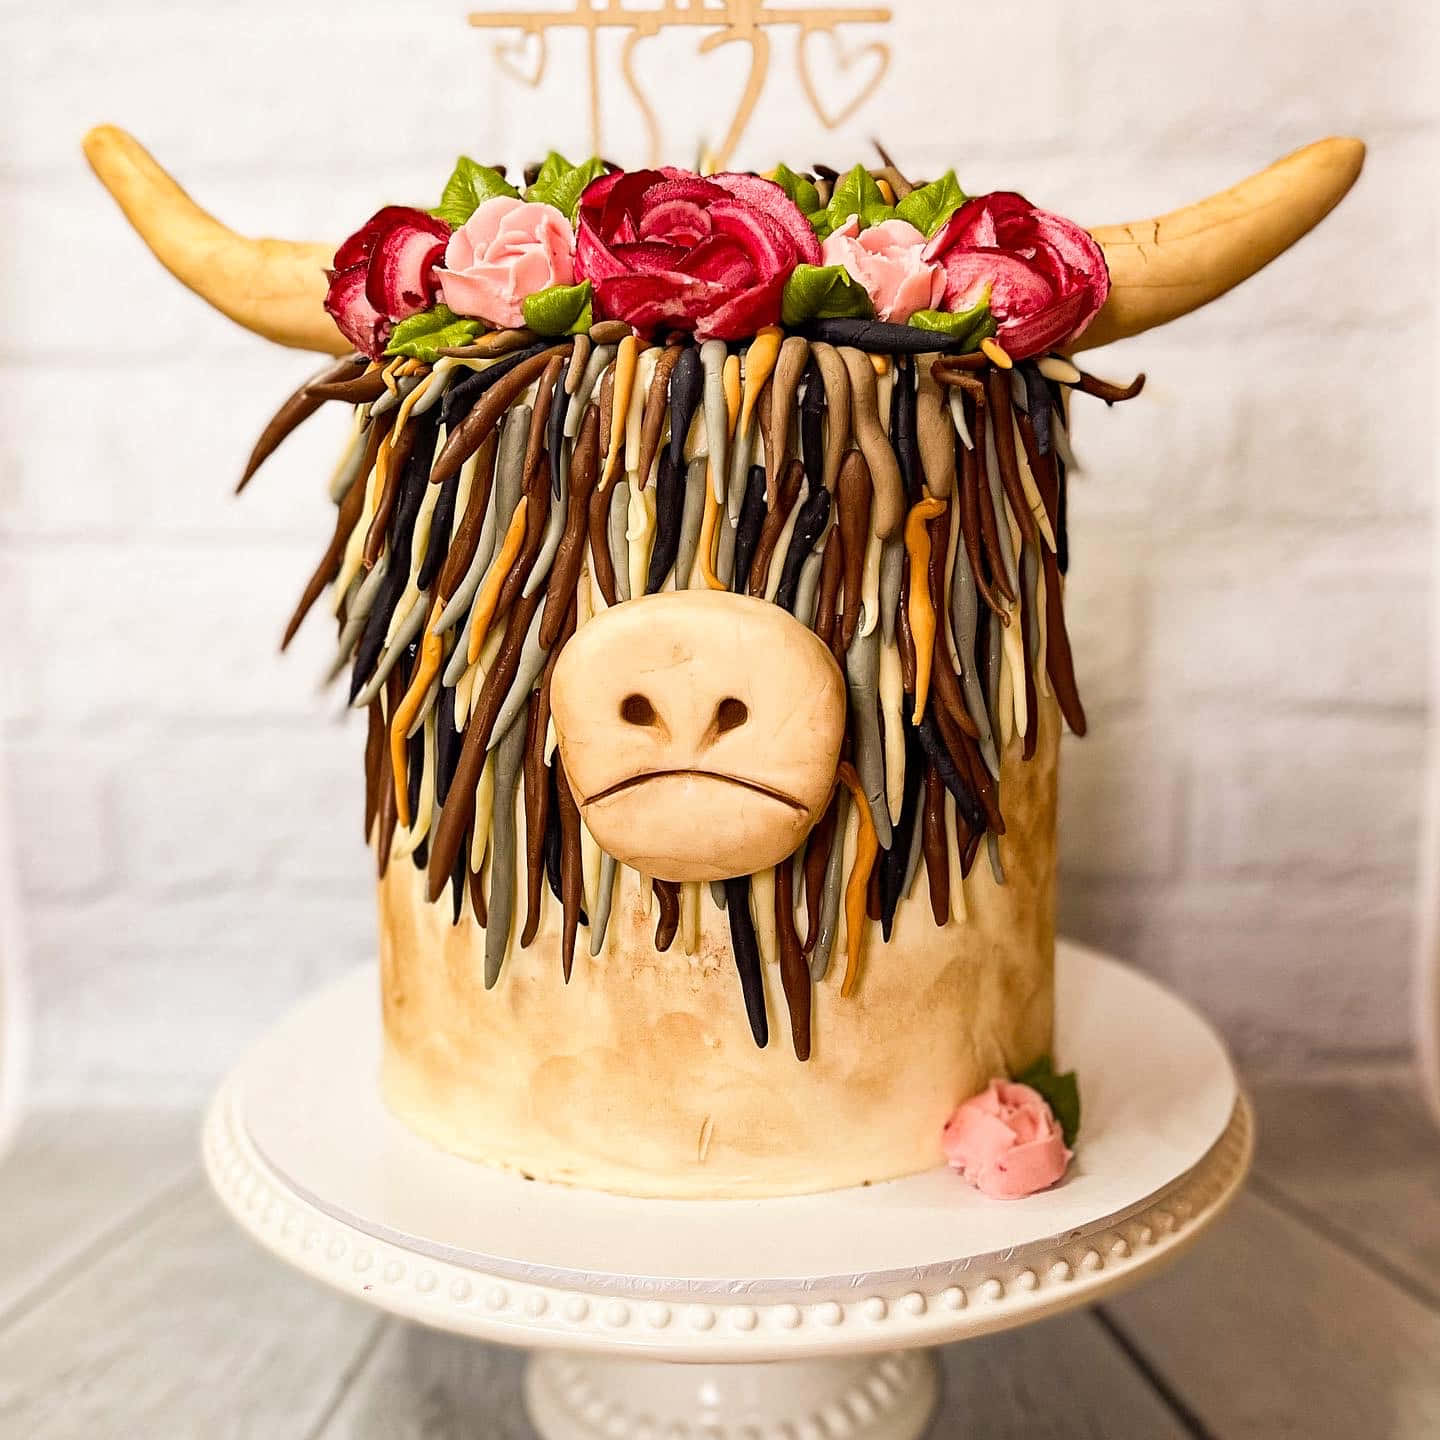 A Cake With A Cow Head On It